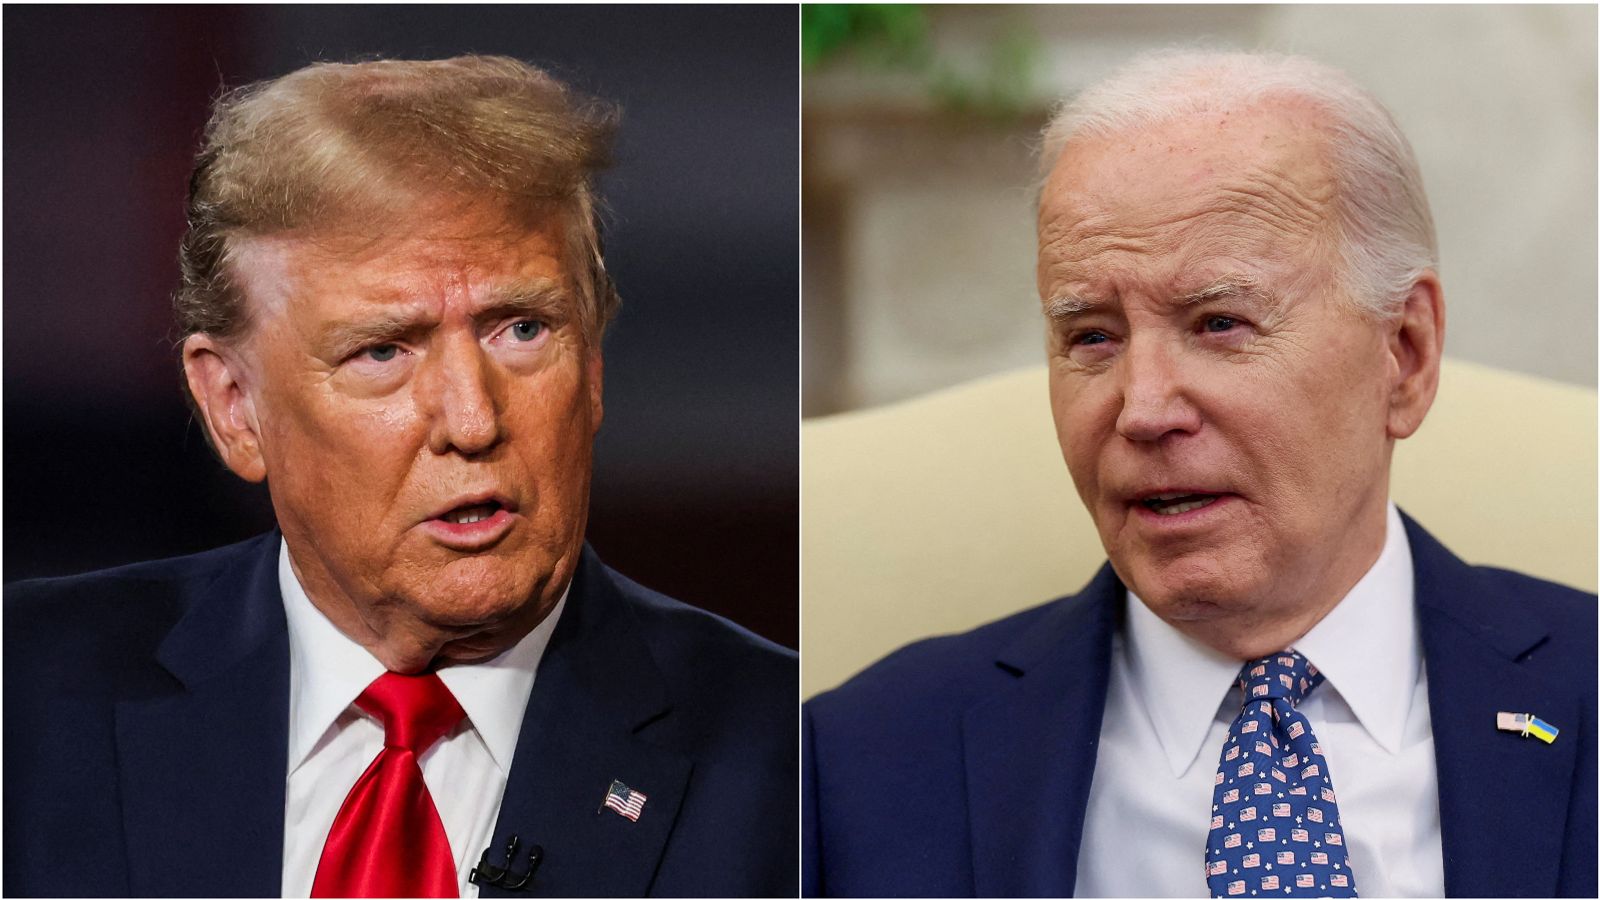 Donald Trump joins Joe Biden in securing his party's presidential nomination - setting up rematch in race for White House